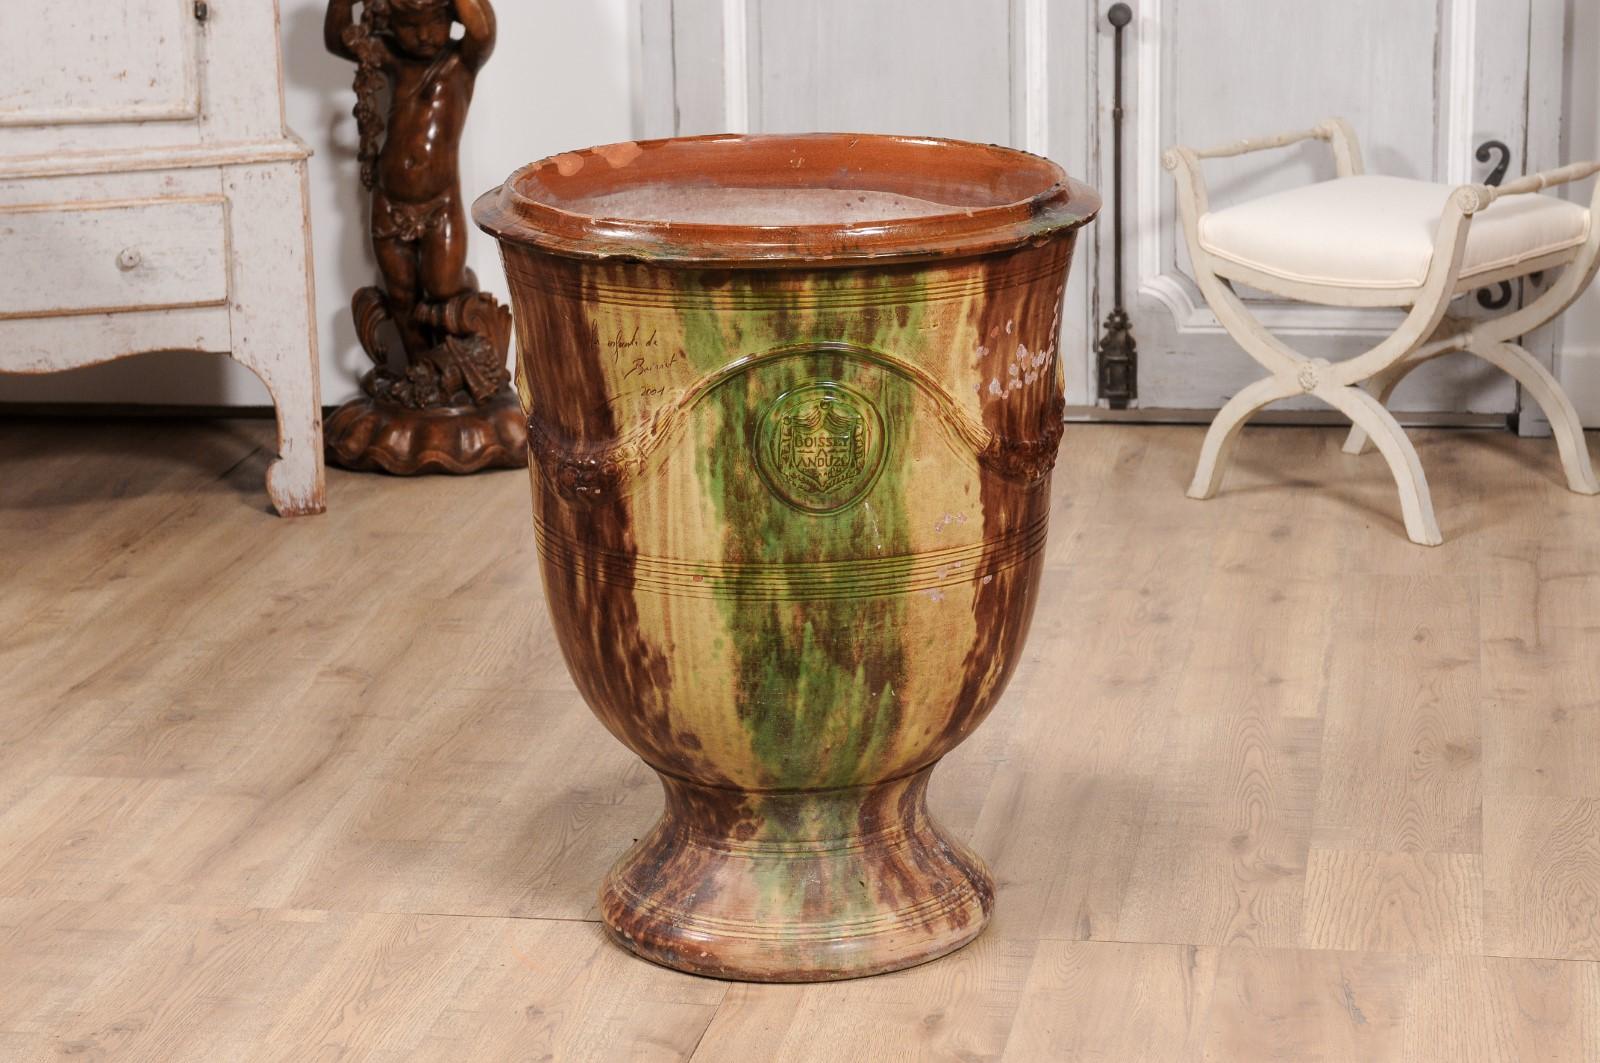 Large French Boisset Anduze Jar with Brown, Green Glaze and Swags, 21st Century For Sale 5